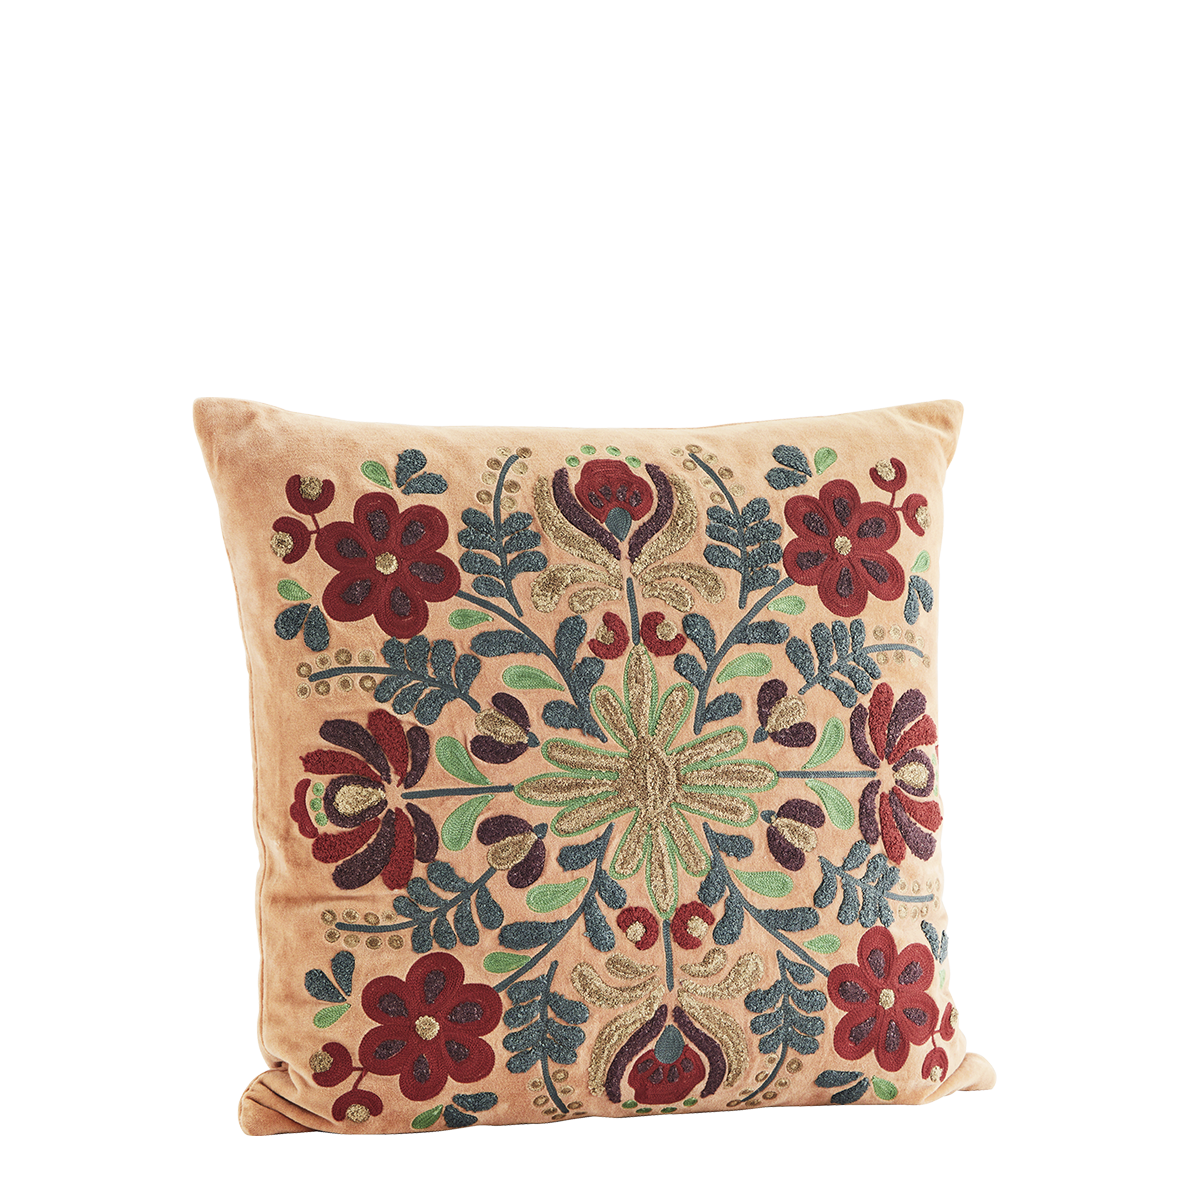 Velvet cushion cover w/ embroidery